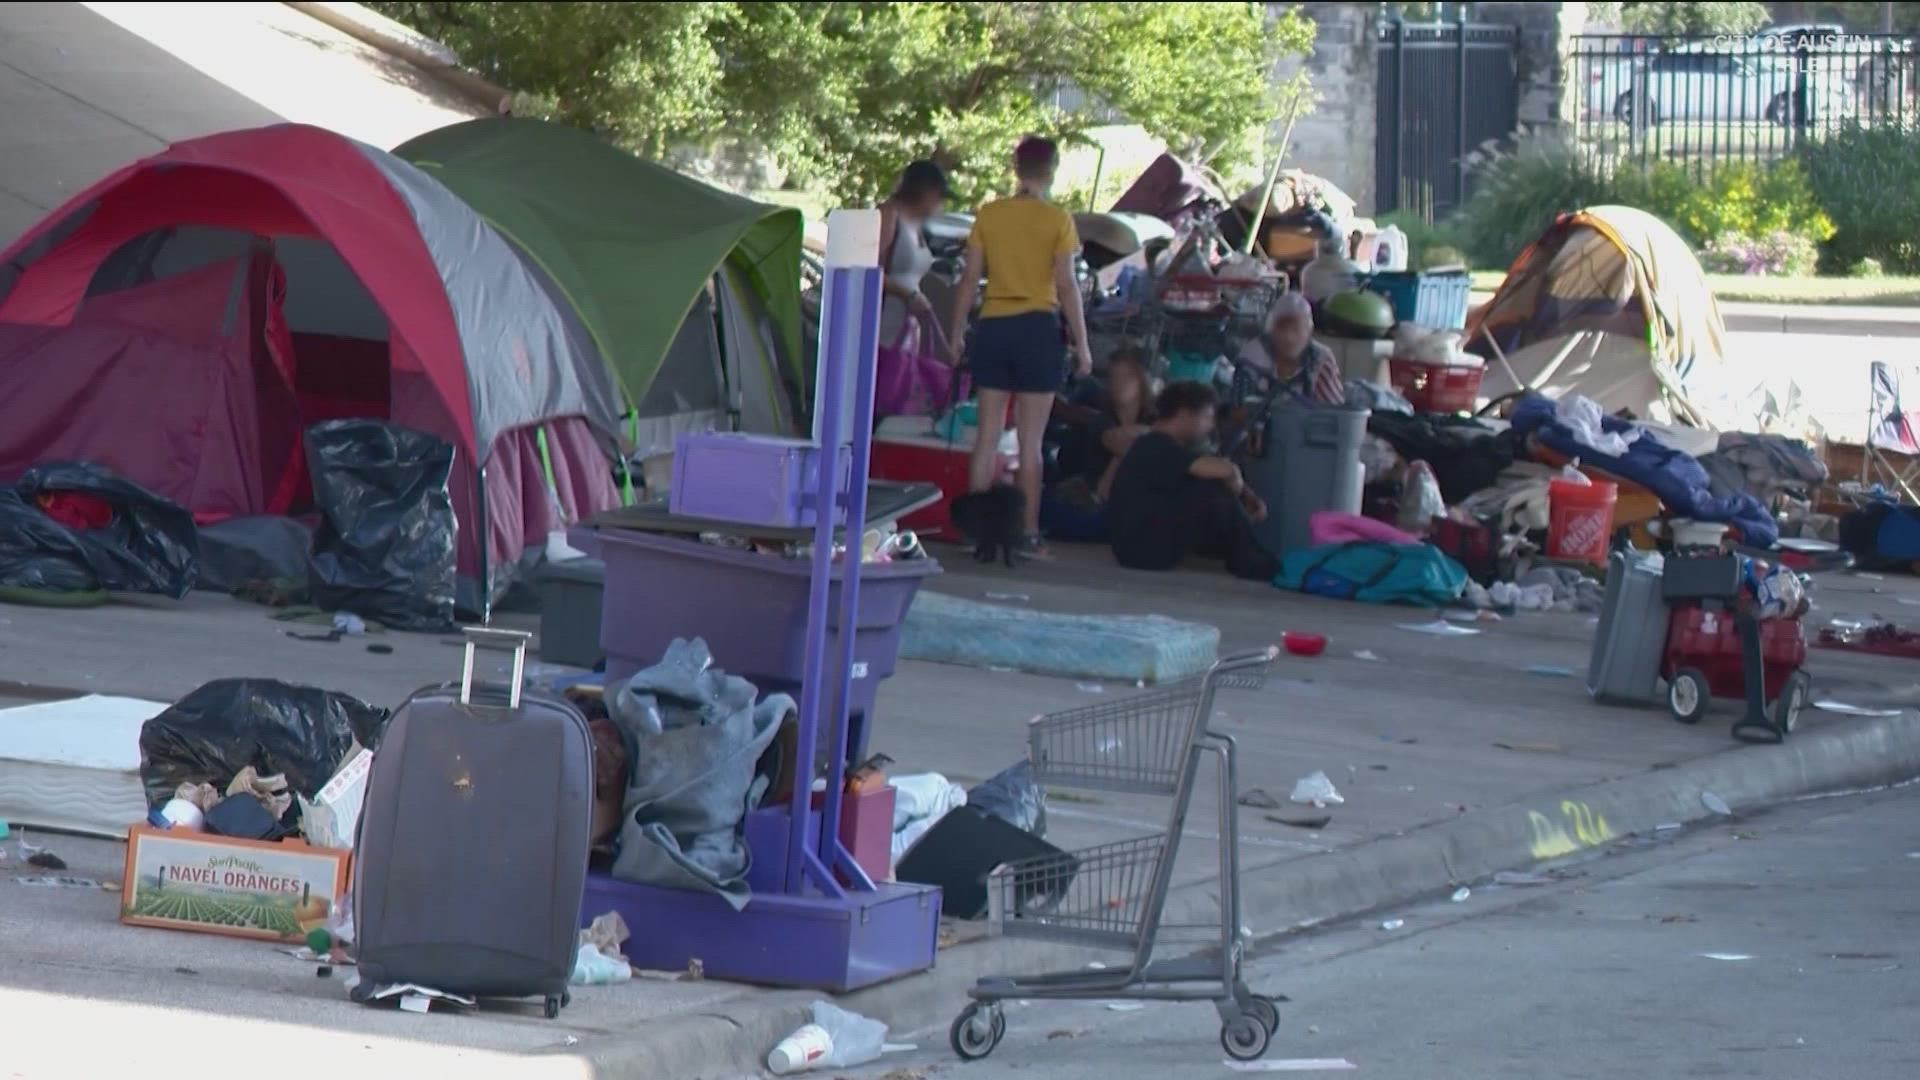 City of Austin said they moved 48 people from homeless encampments to temporary shelters.